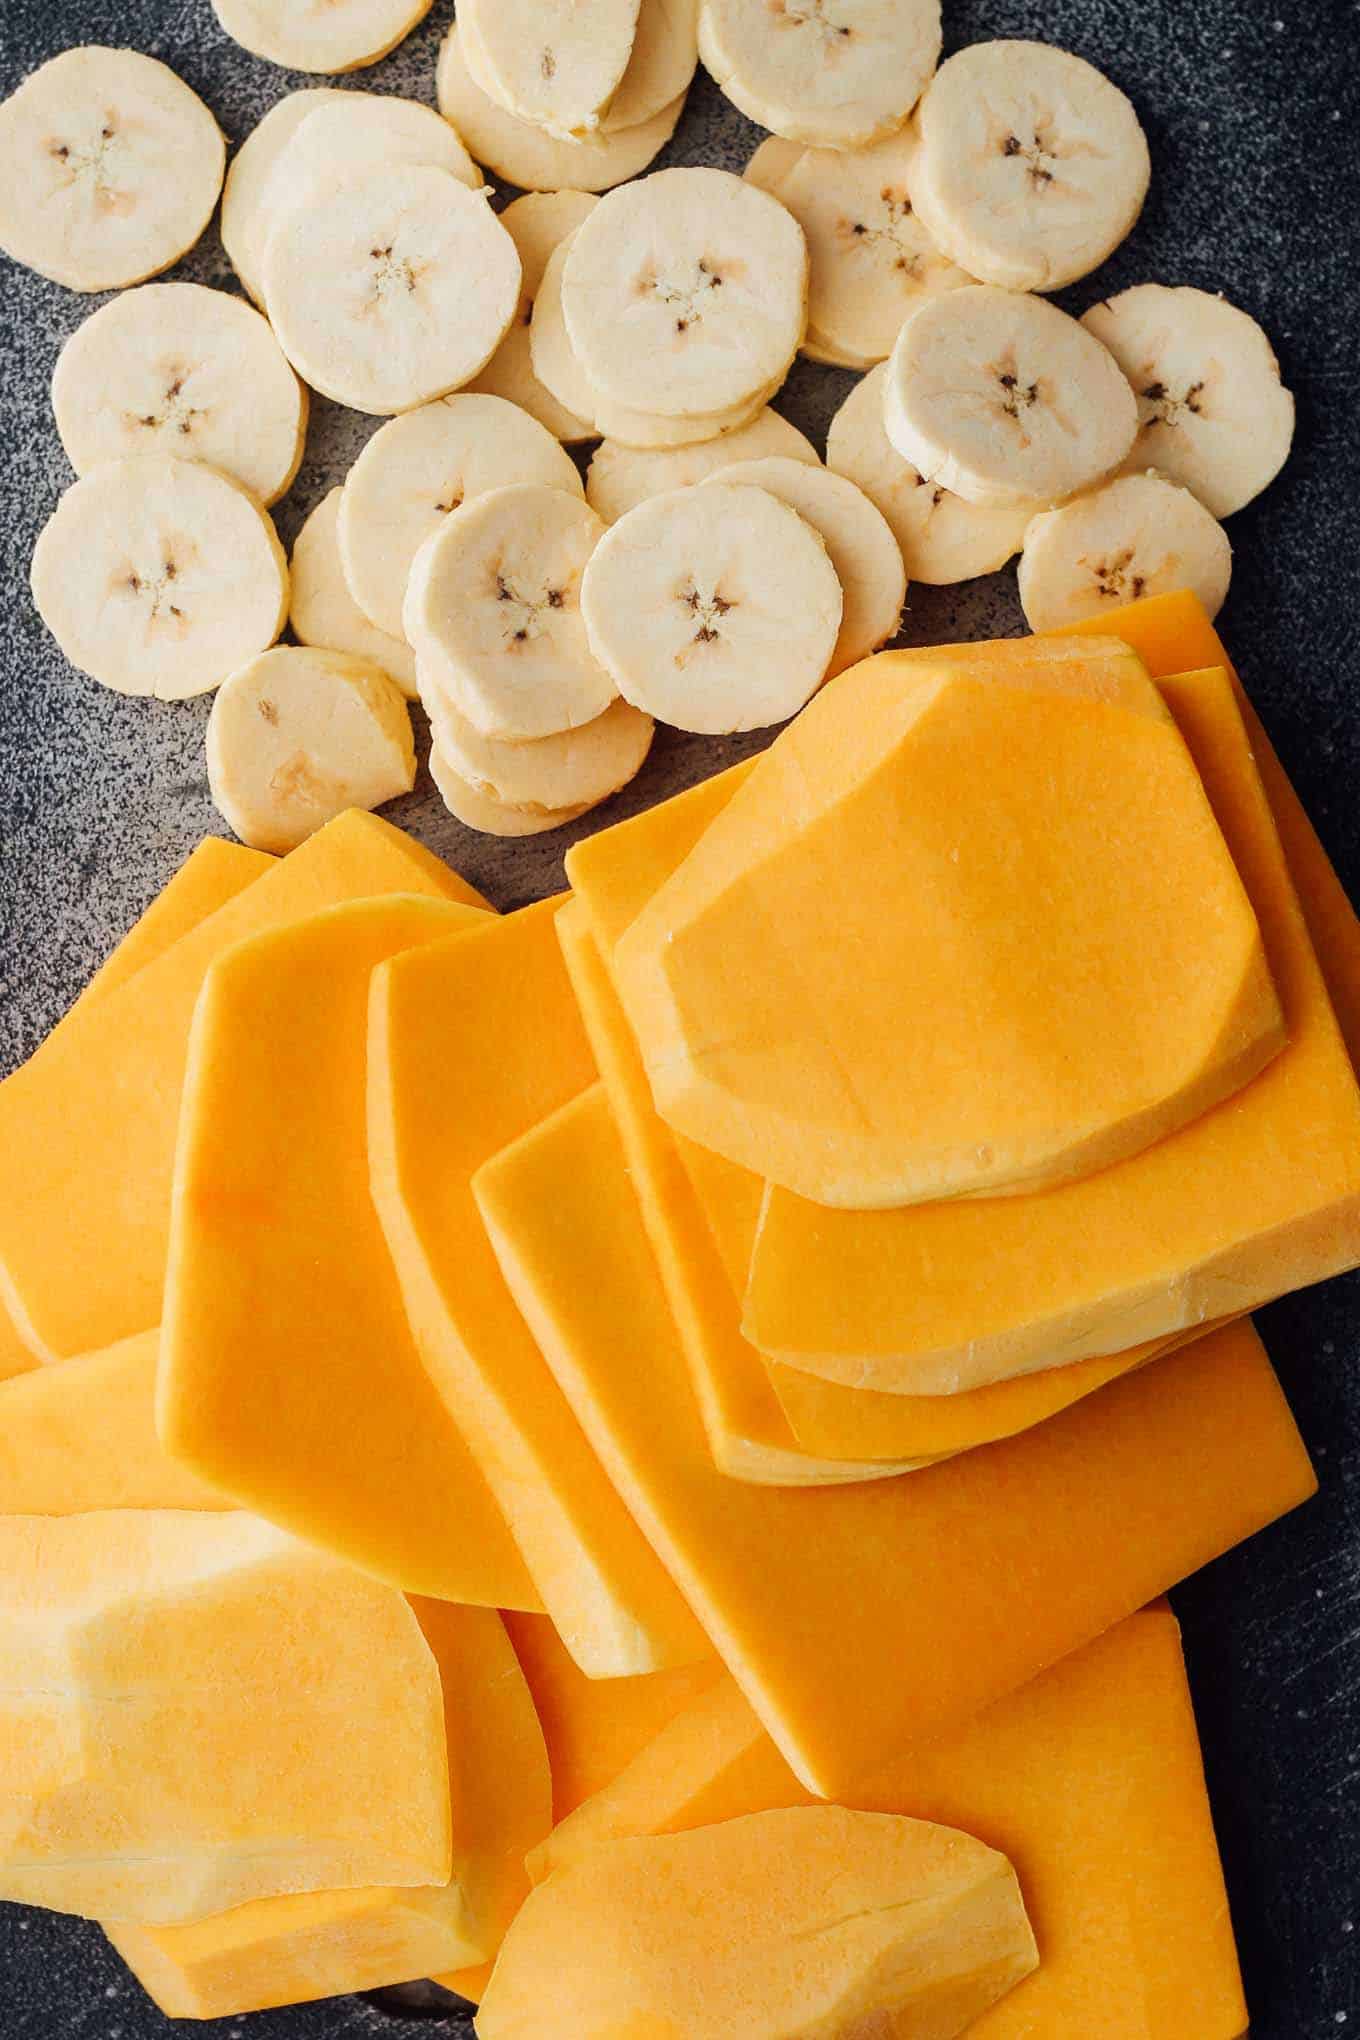 A cutting board full of butternut squash and plantain slices